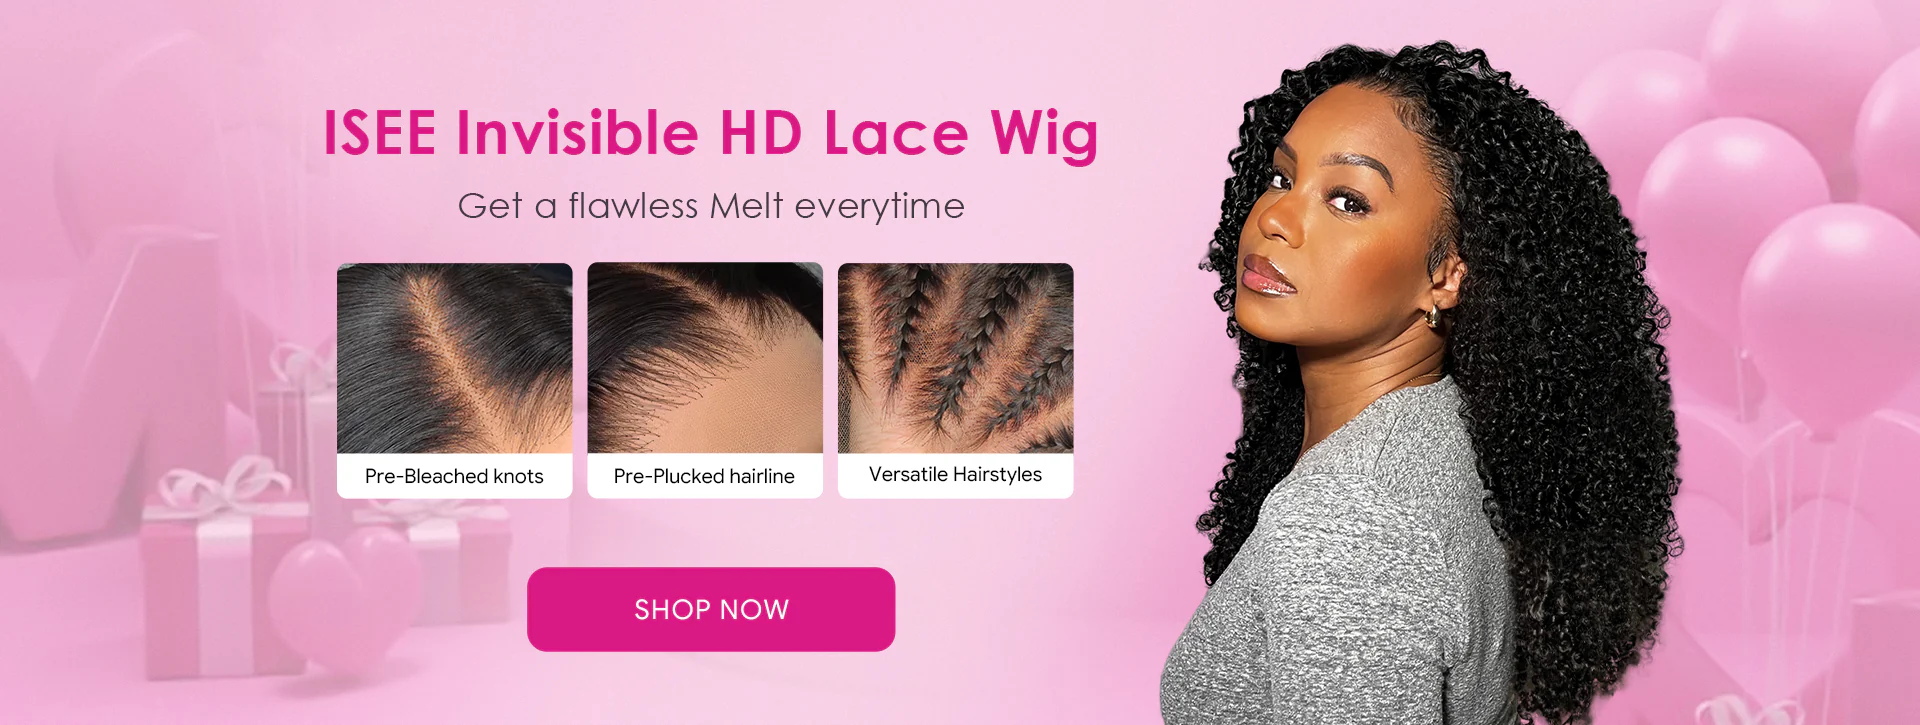 ISEE Mother's Day Sale HD Lace Wig